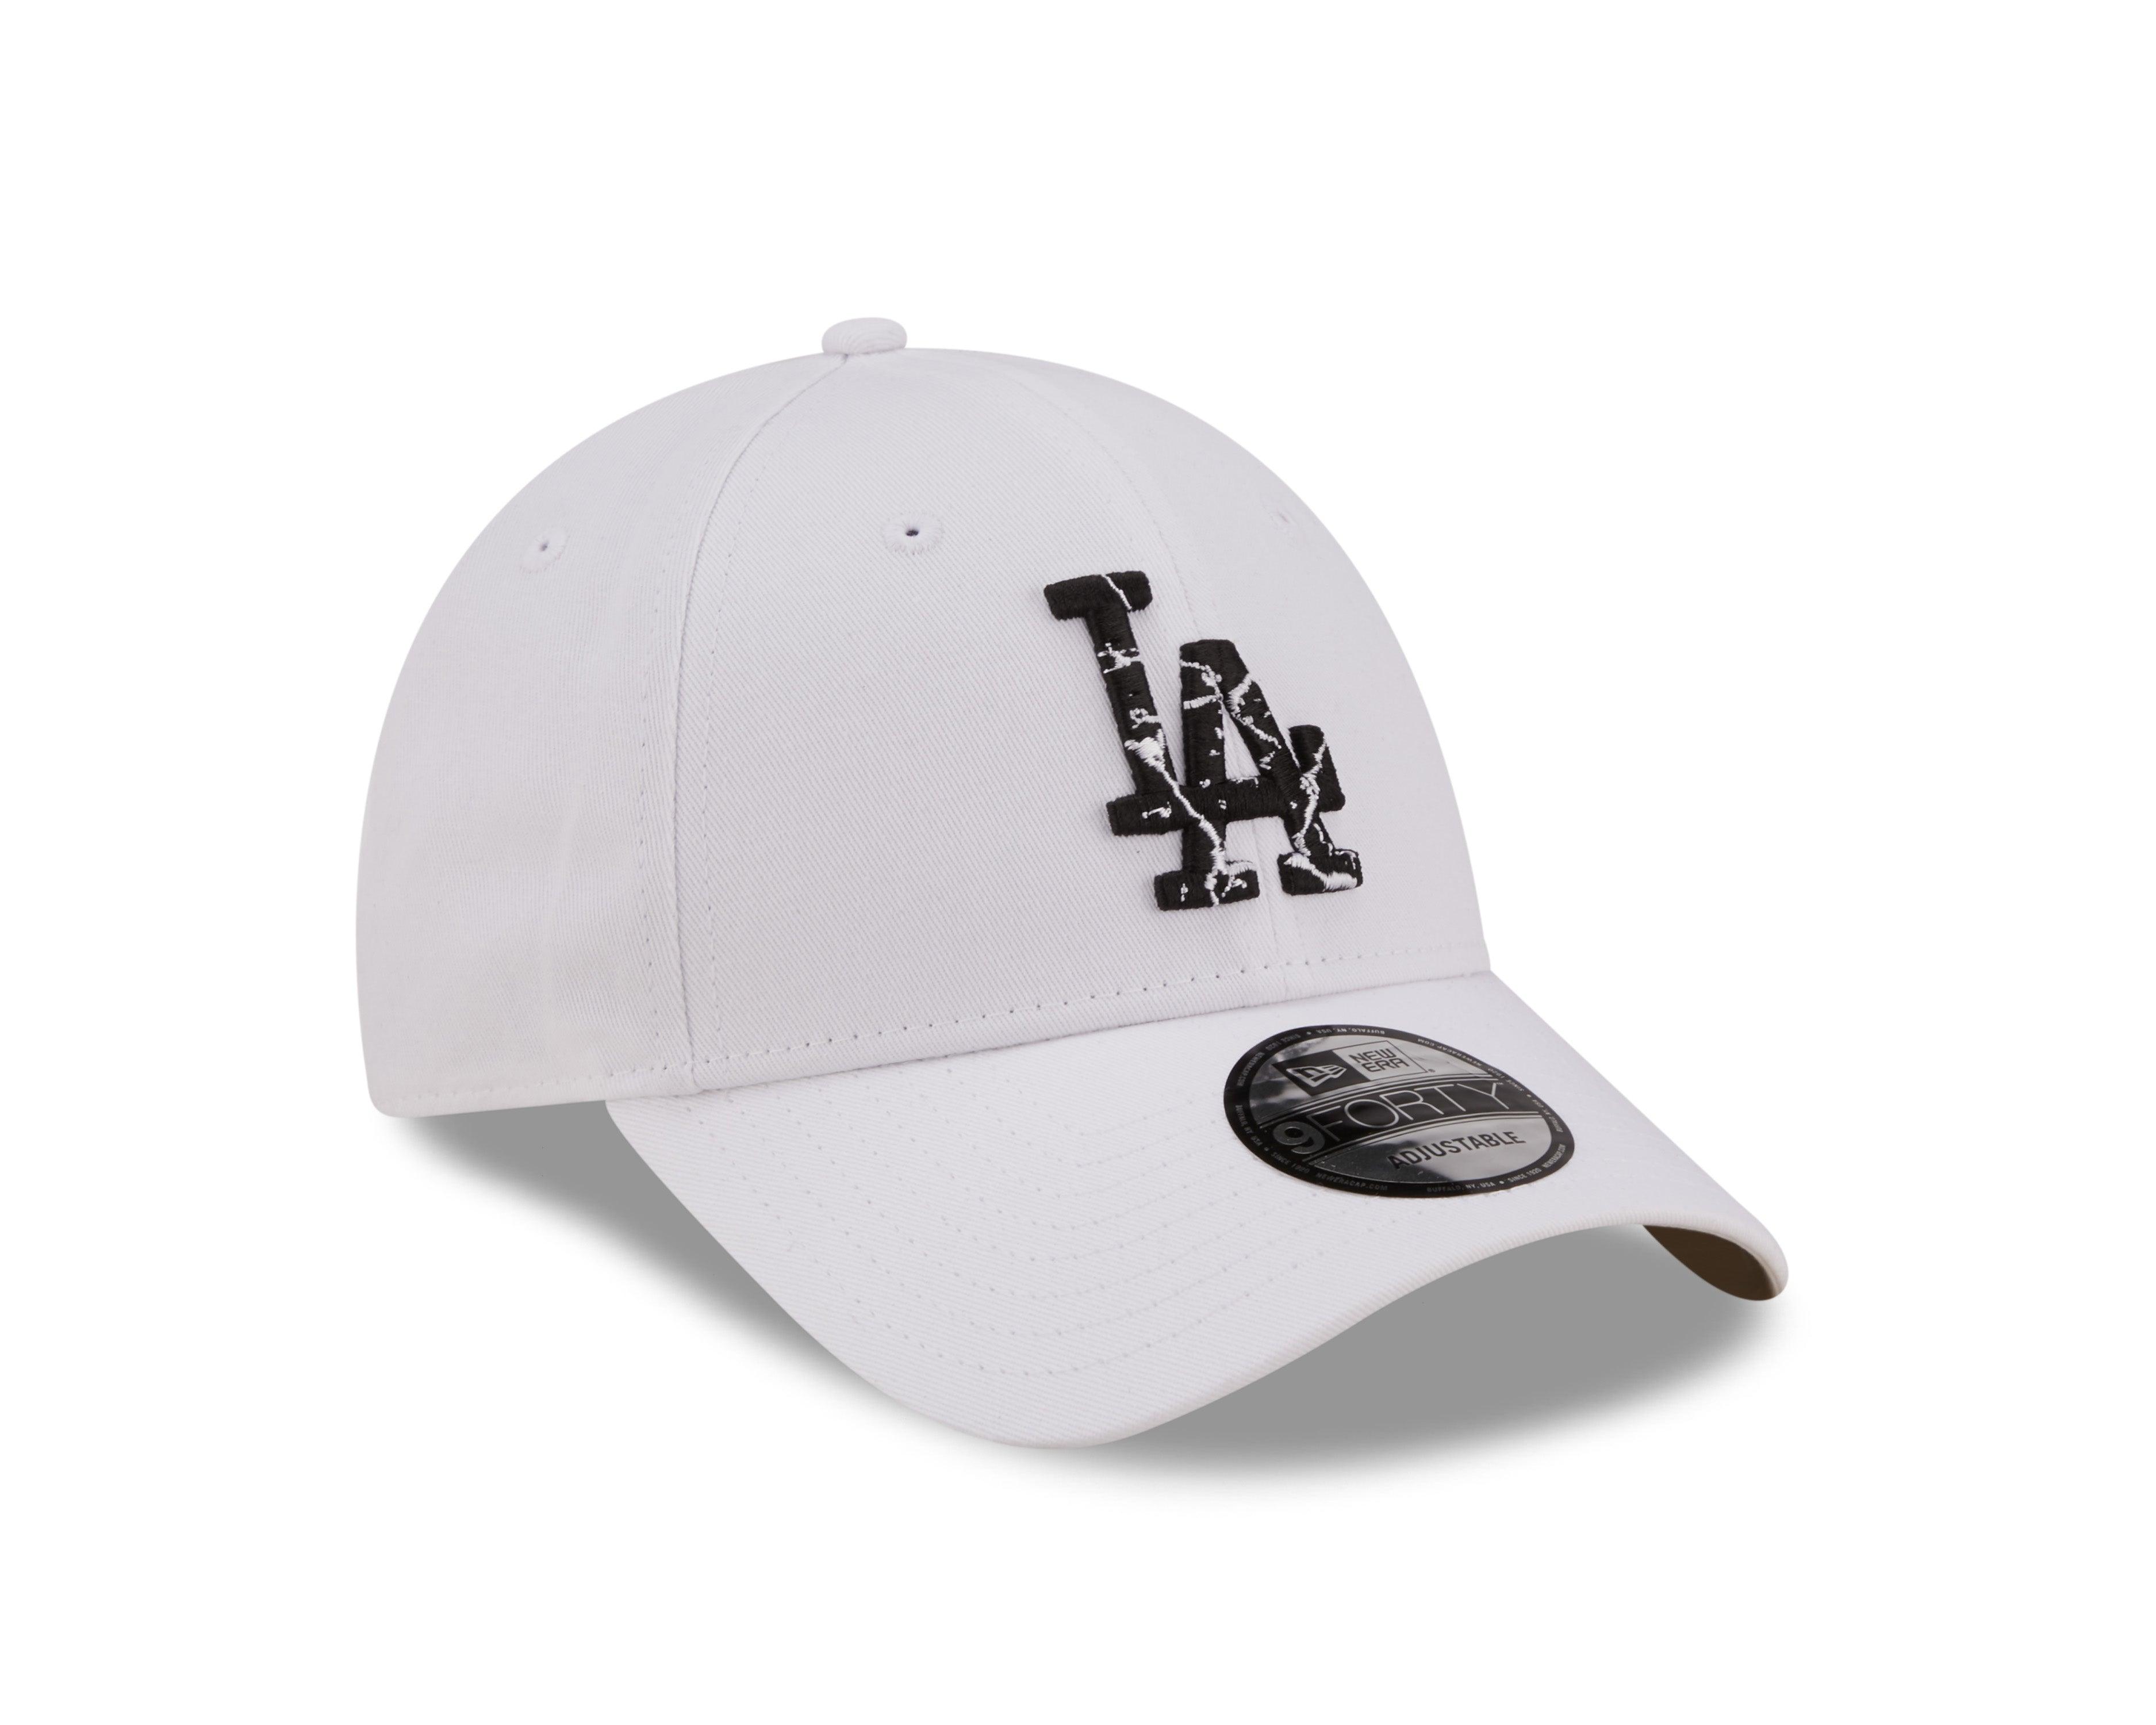 NEW ERA 9FORTY MLB INFILL LOS ANGELES DODGERS WHITE CAP - FAM